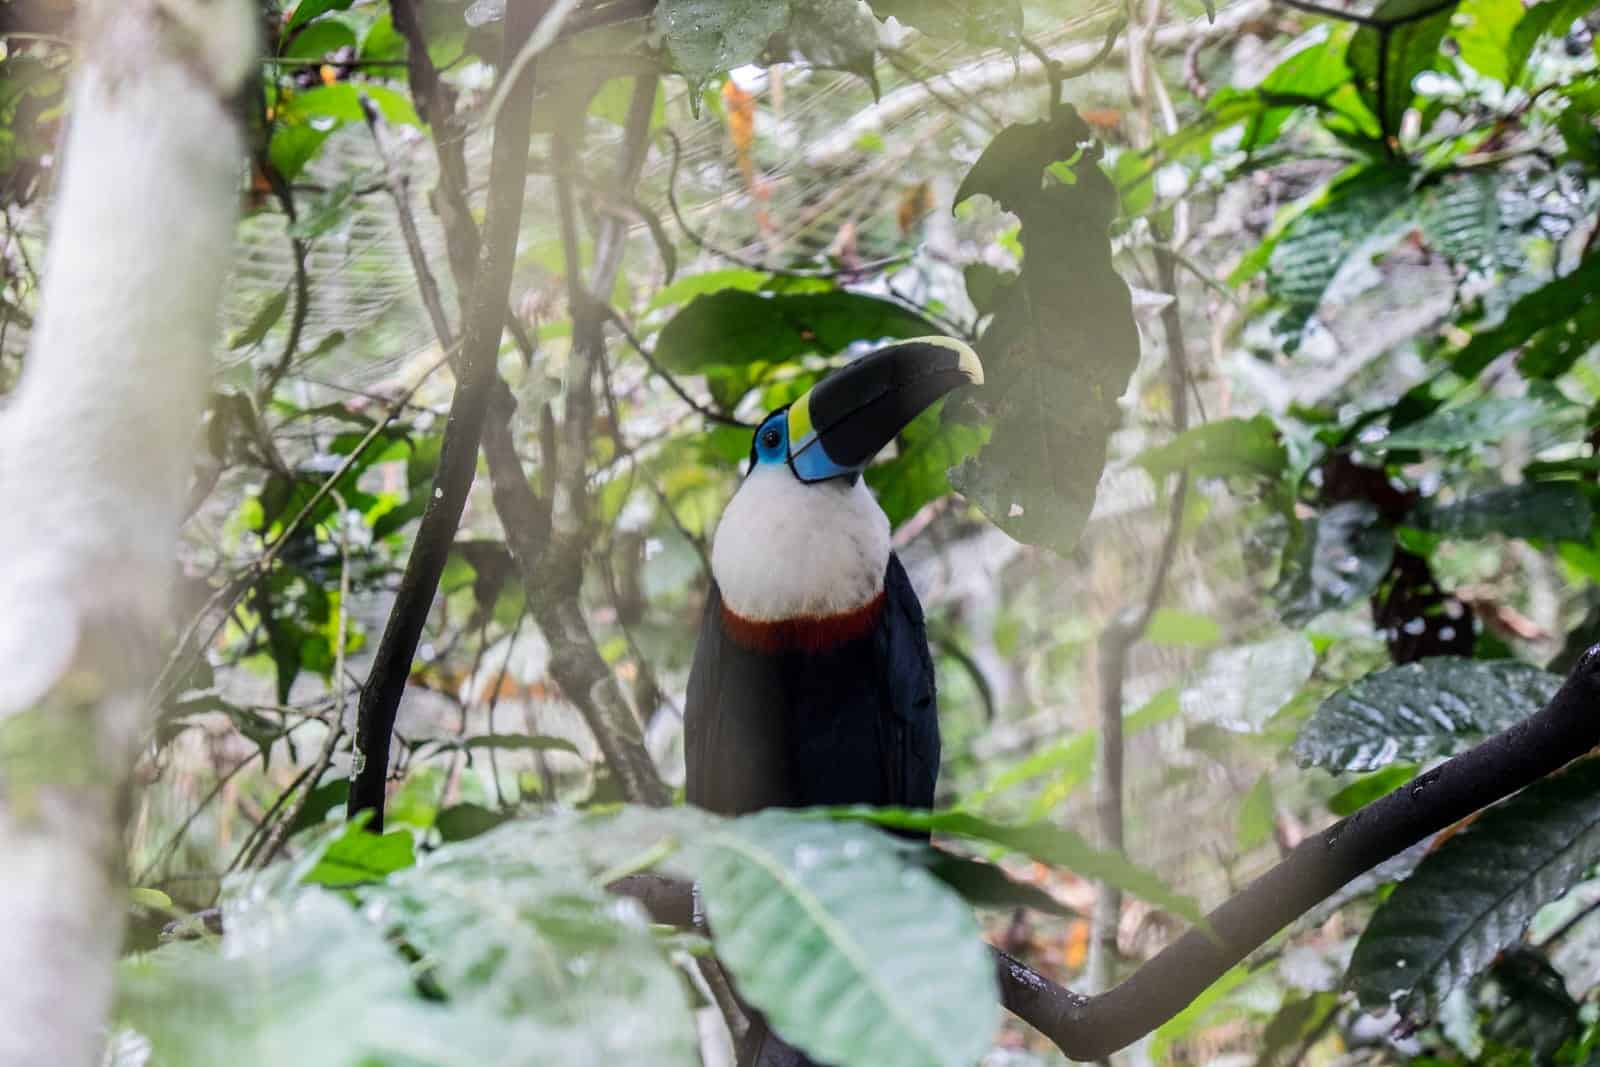 A black and white blue and yellow beaked bird seen sitting on a tree branch in the Ecuador Amazon Rainforest Animal Centre